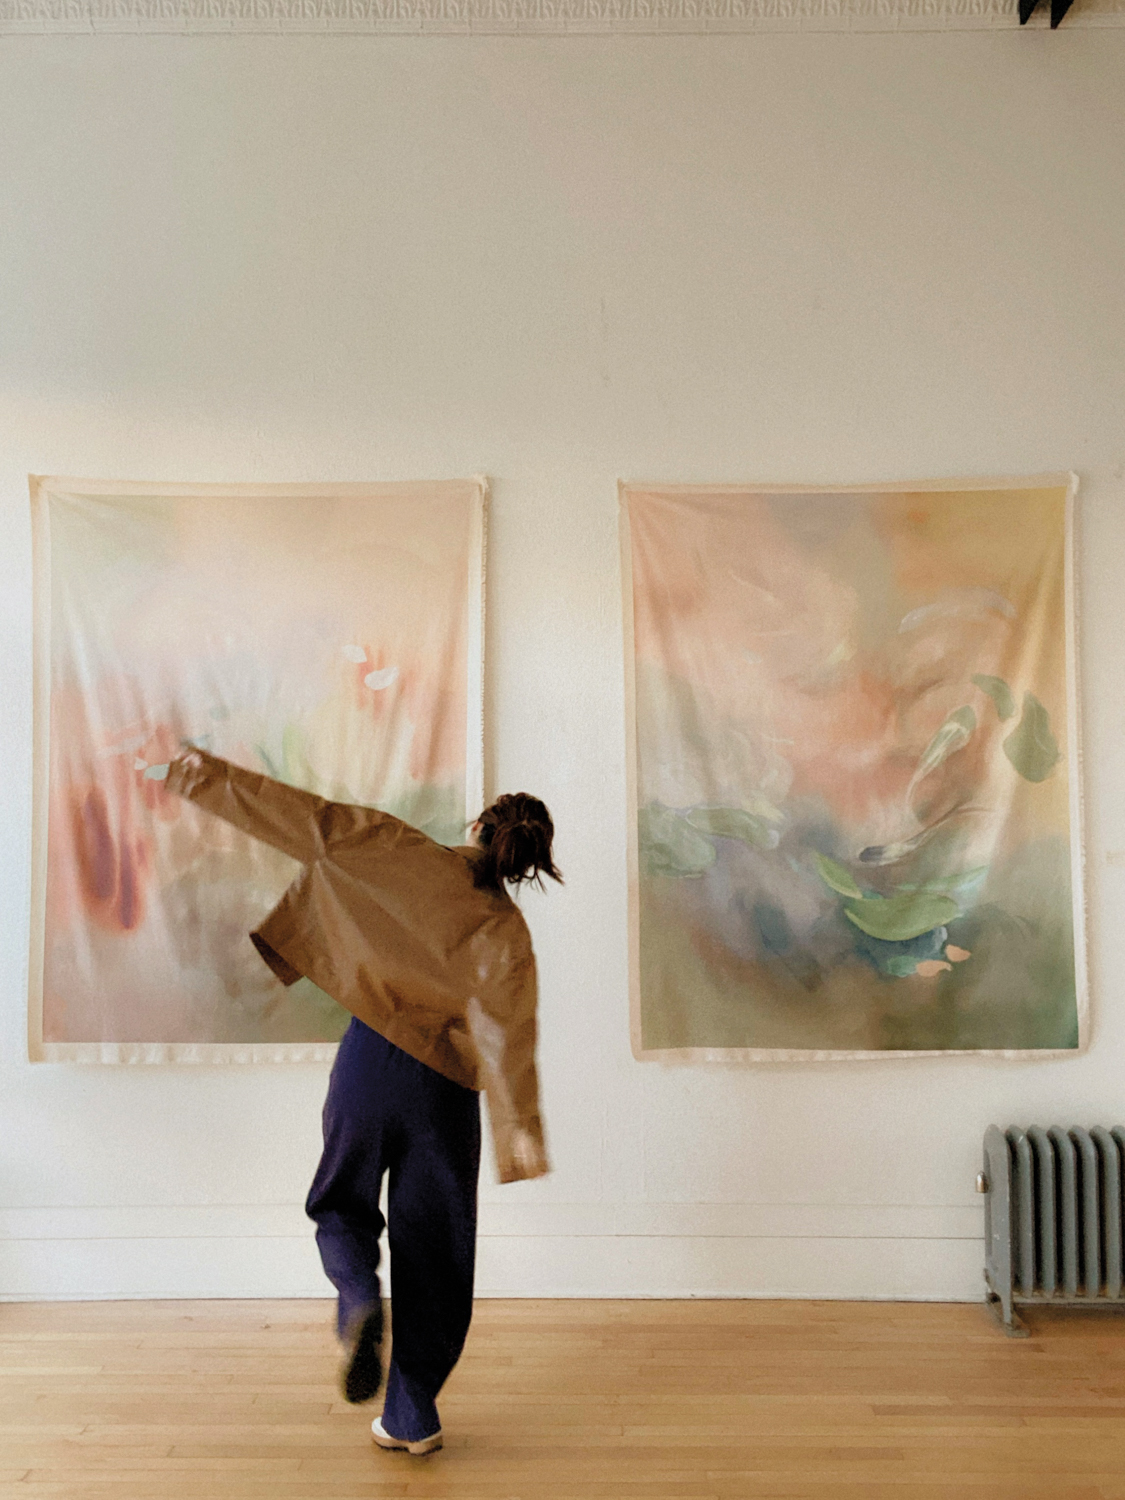 Artist AOTH standing in front of two of her artworks on fabric hanging loosely on a wall